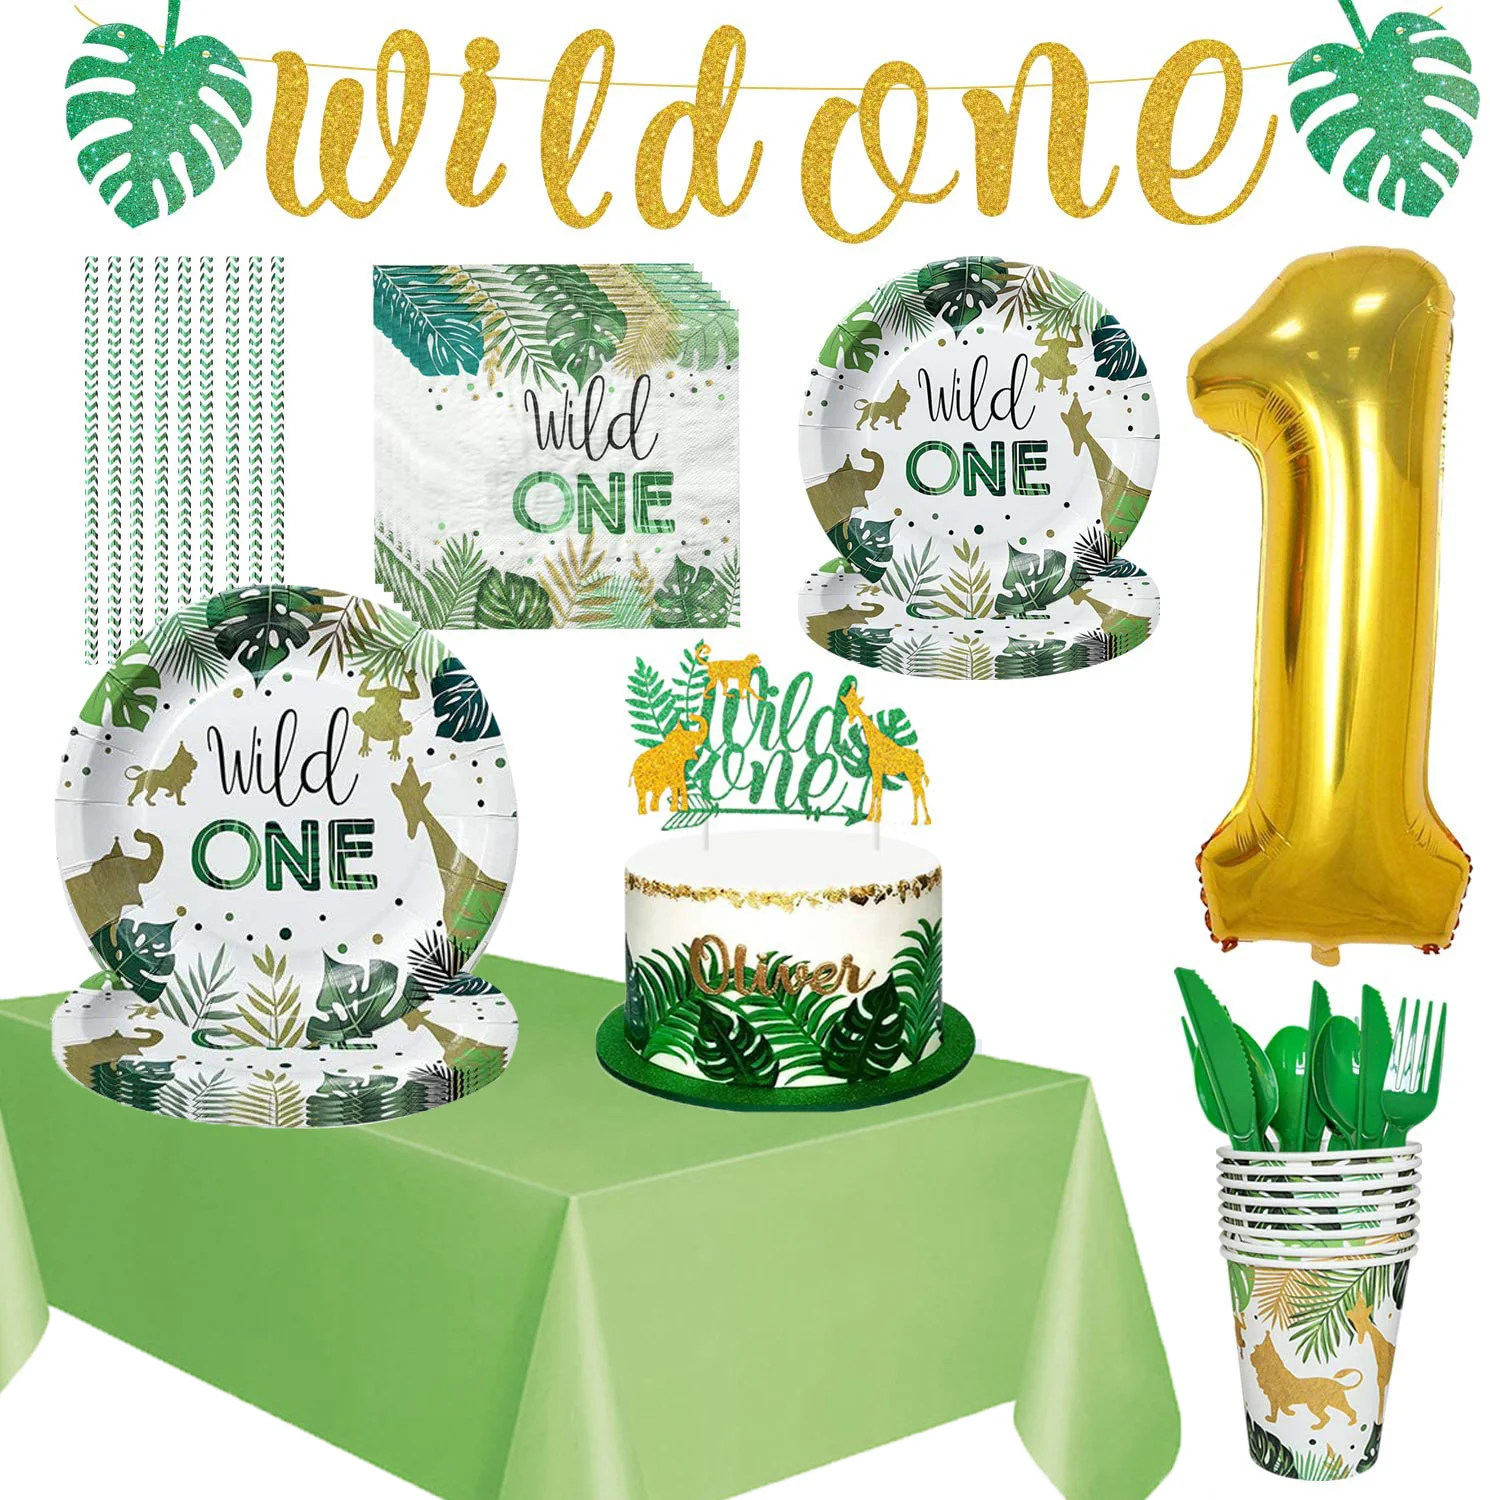 Wild One Birthday Decorations Forest Party Supplies Plates Napkins Cups Balloons 1st Safari Birthday Decorations Tableware Set